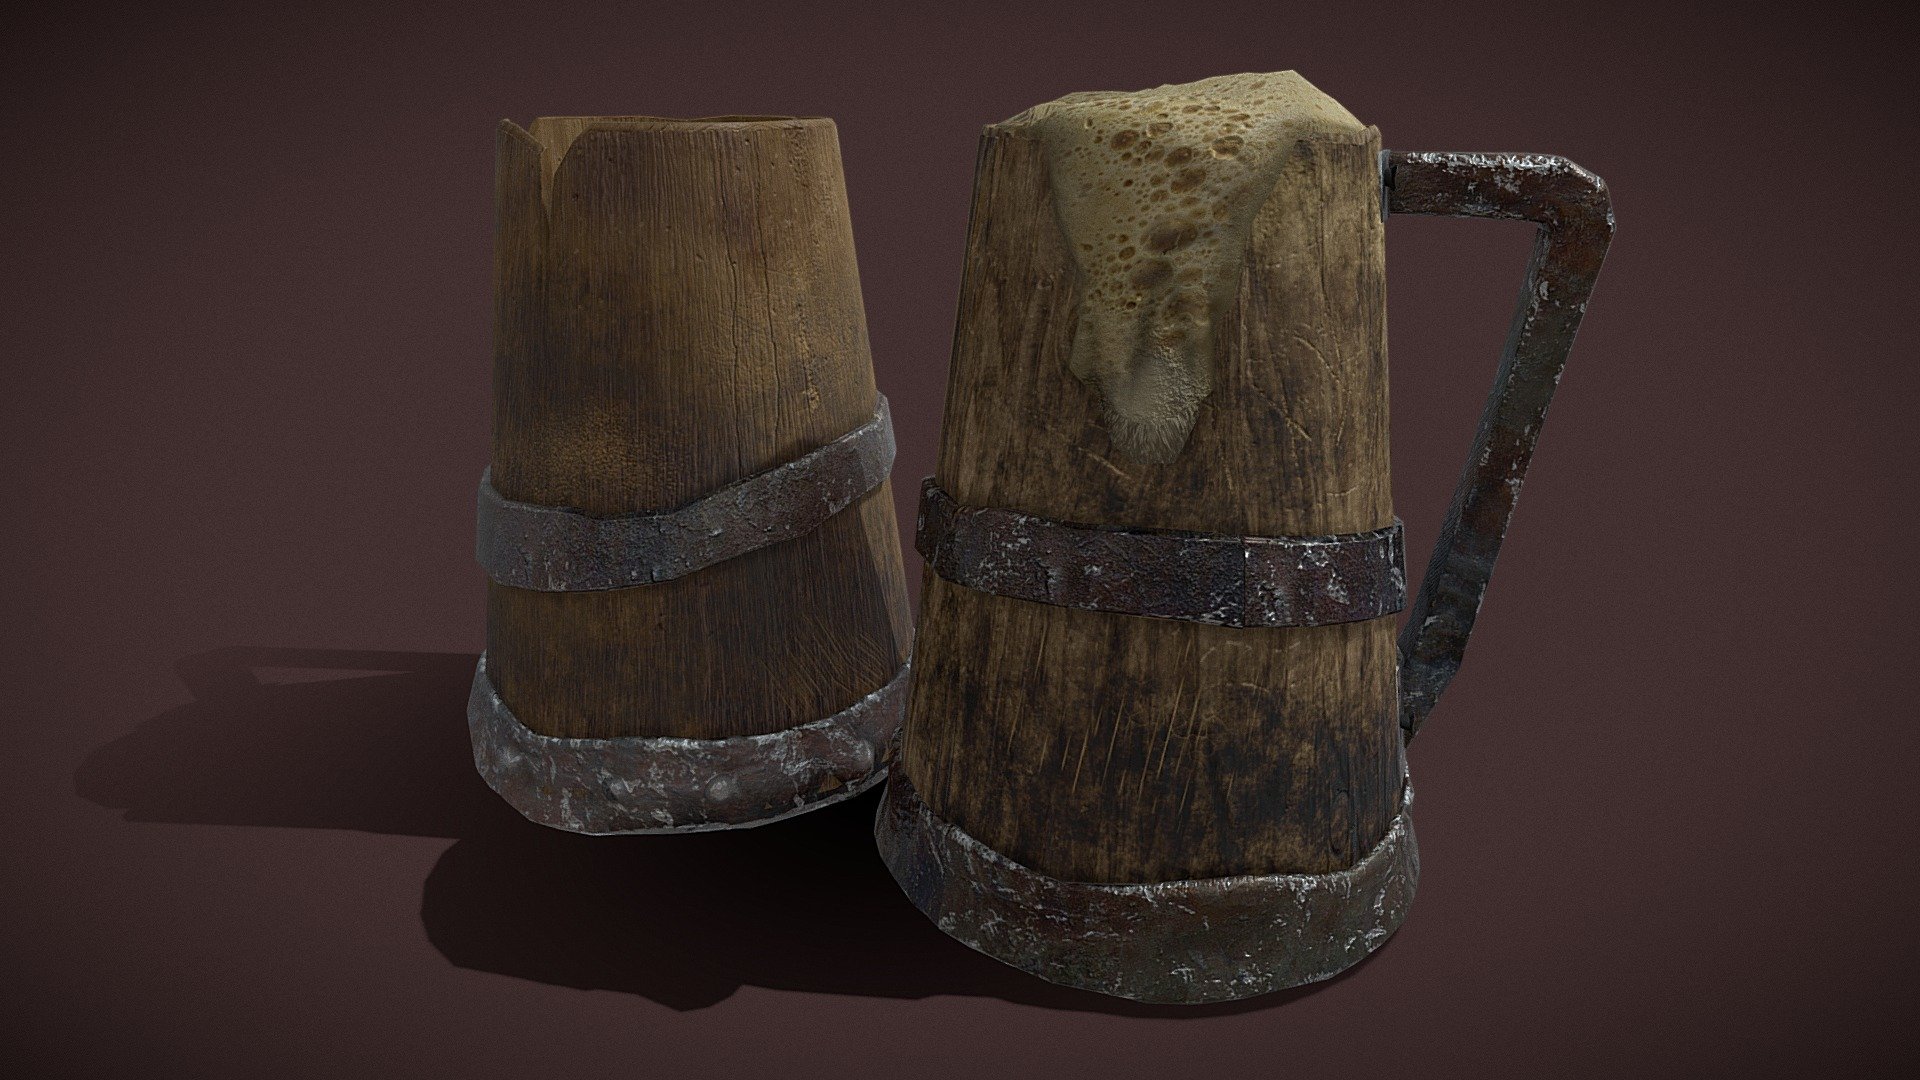 the set of two medieval mugs with foam included the low poly and perfect for game or animation scene, modeled in maya textured in substance painter , from our team at GetDeadEntertainment - Beer Mugs - Buy Royalty Free 3D model by GetDeadEntertainment 3d model